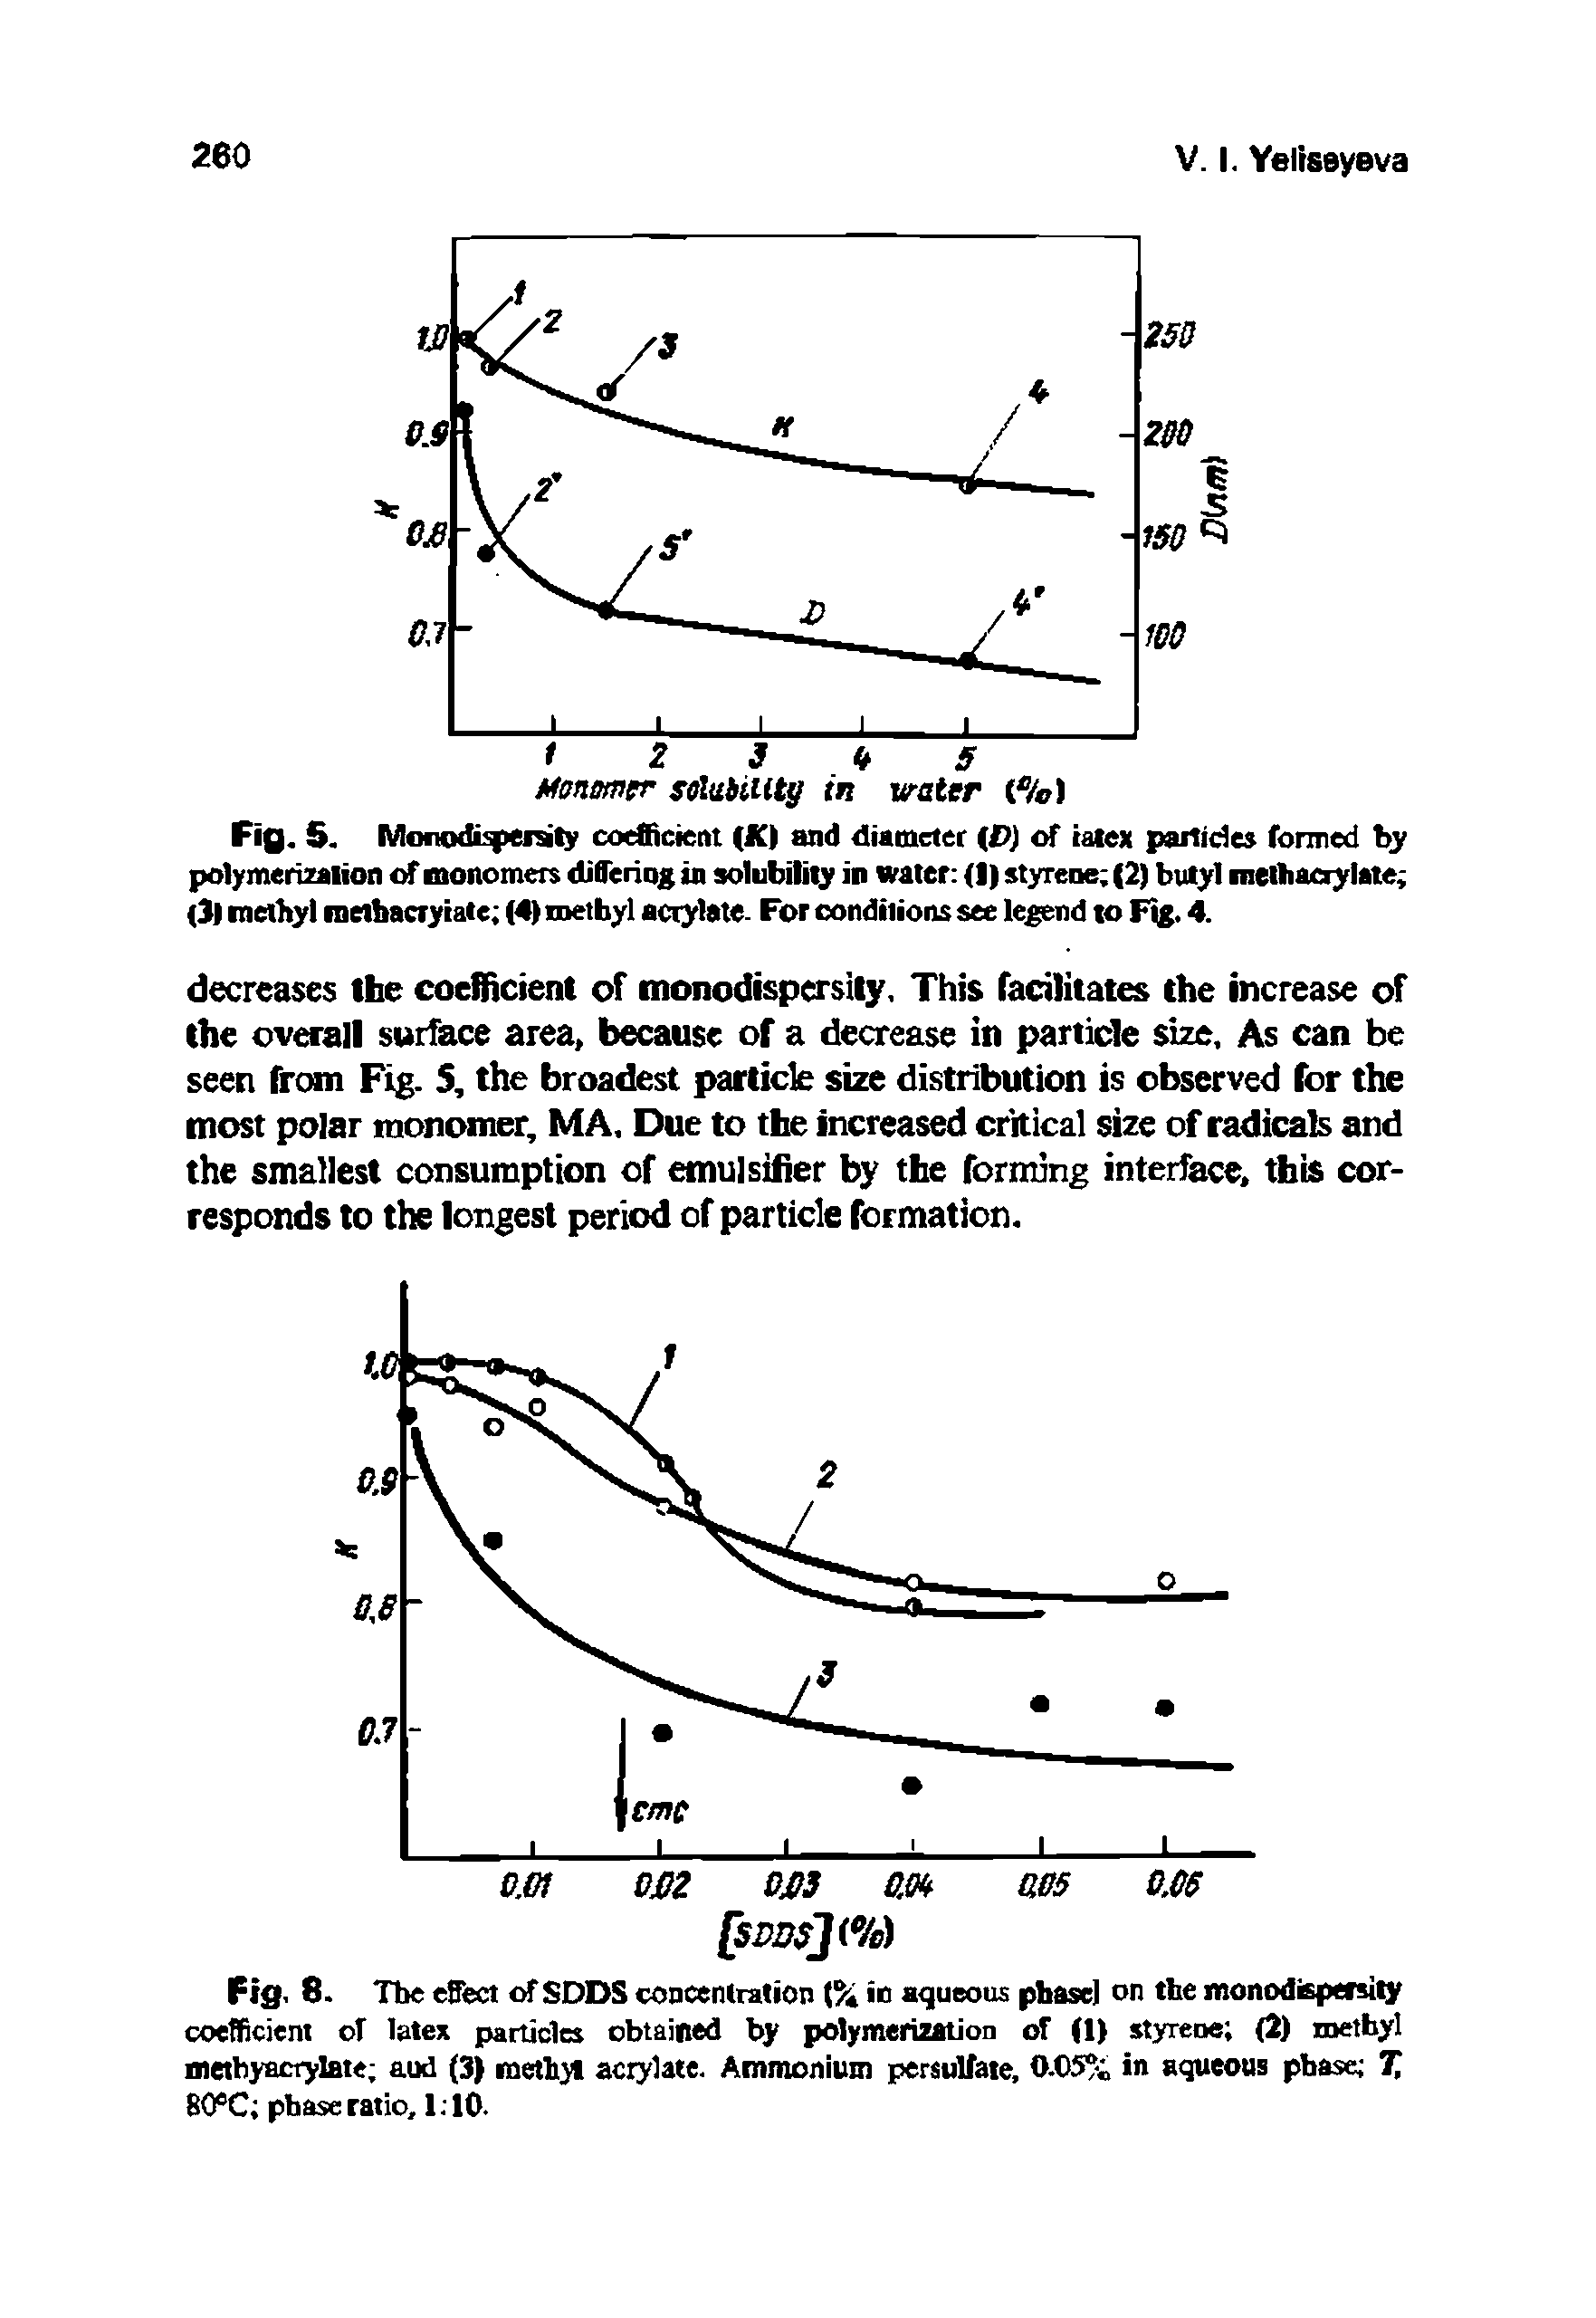 Fig. 8. The effect of SDDS concentration (% in aqueous phase) on the monodispersity coefficient oT latex particles obtained by polymerization of (1) styrene (2) methyl methyacrylate aud (3) methyl aciylate. Ammonium persulfate, 0.05/i in aqueous phase T, 80°C phase ratio, 1 10.